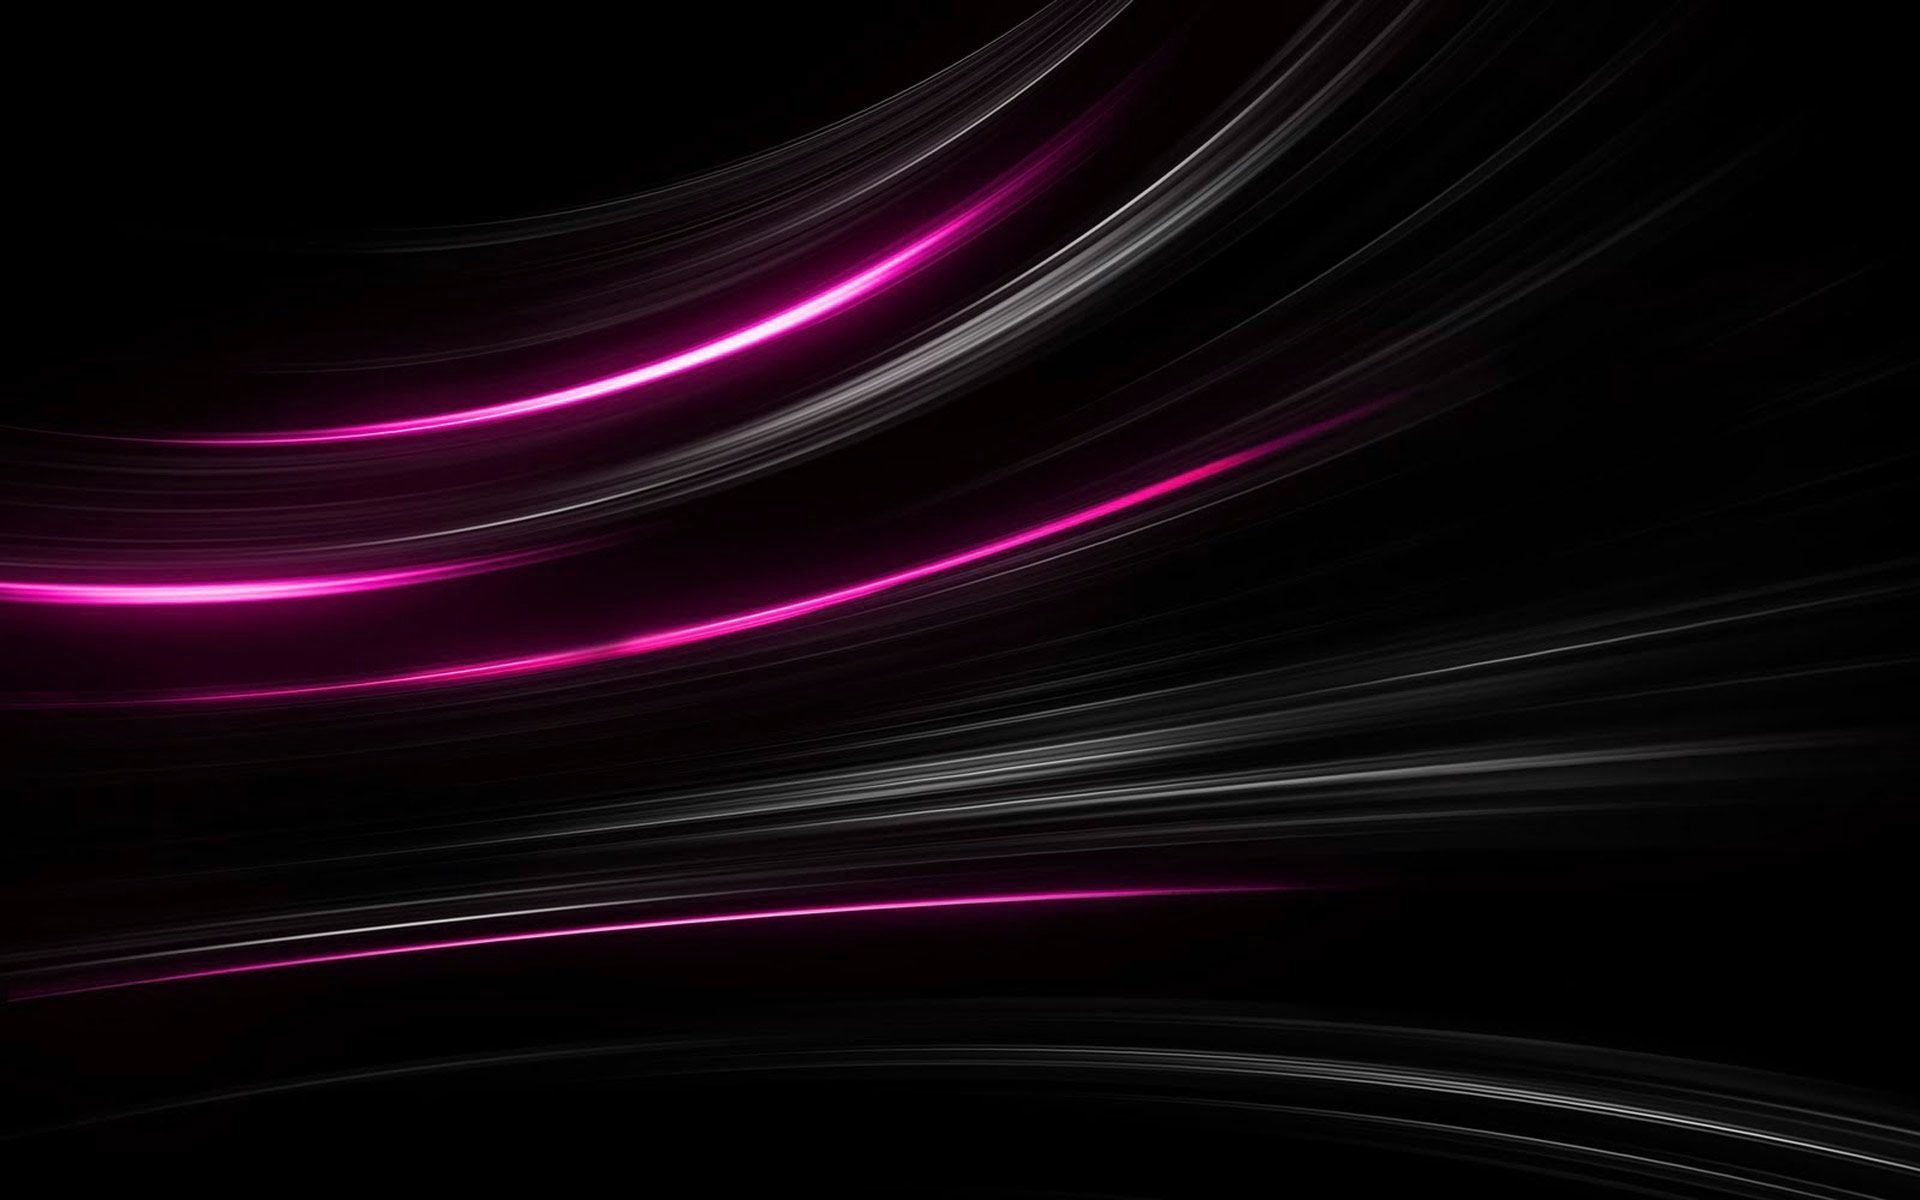  Pink  And Black  Wallpapers  Group 77 